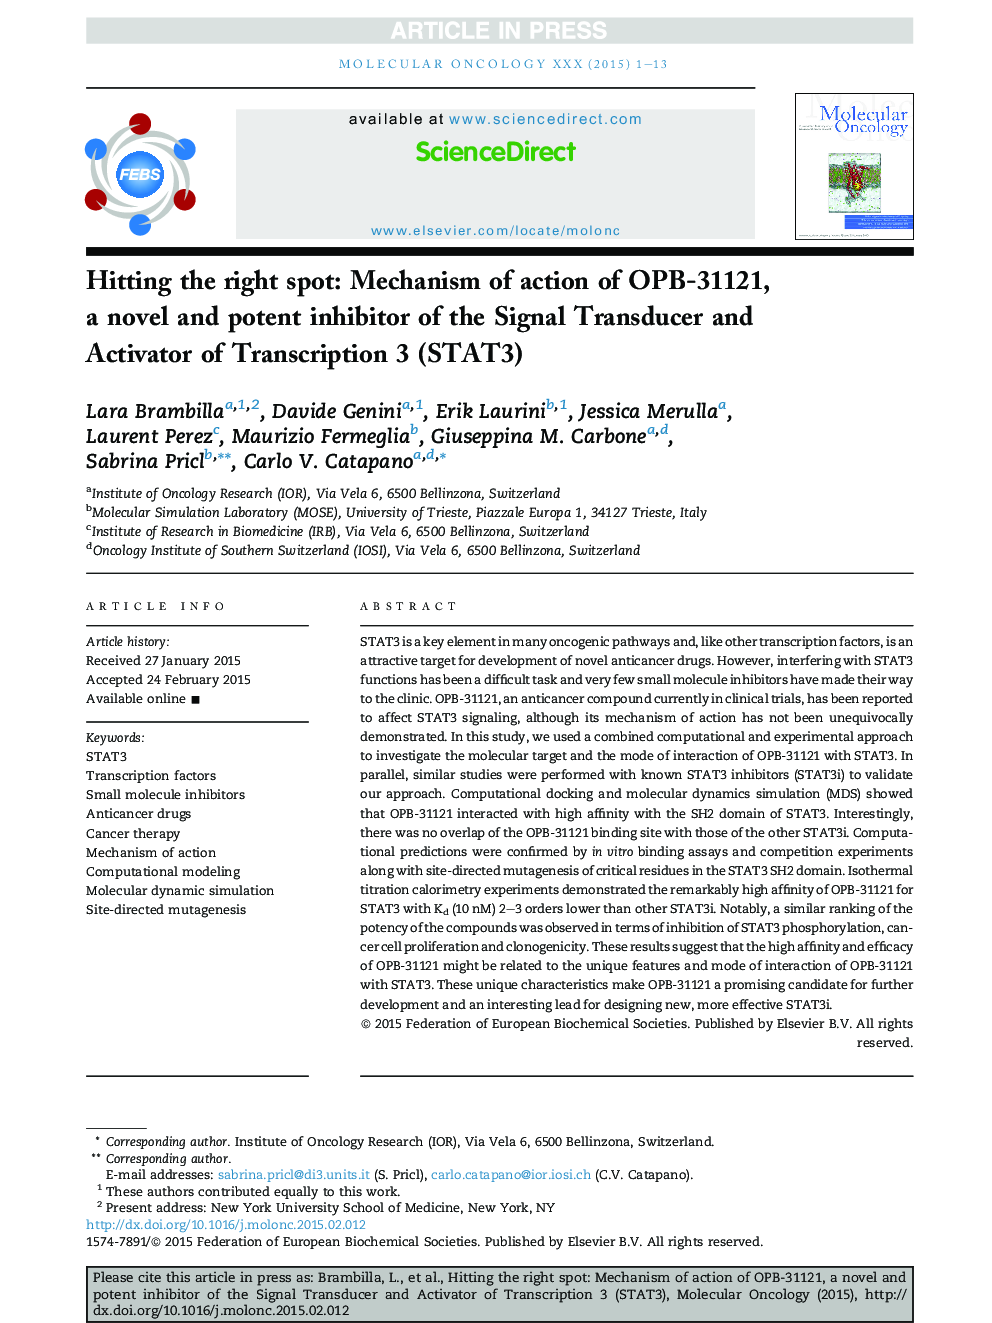 Hitting the right spot: Mechanism of action of OPB-31121, a novel and potent inhibitor of the Signal Transducer and Activator of Transcription 3 (STAT3)